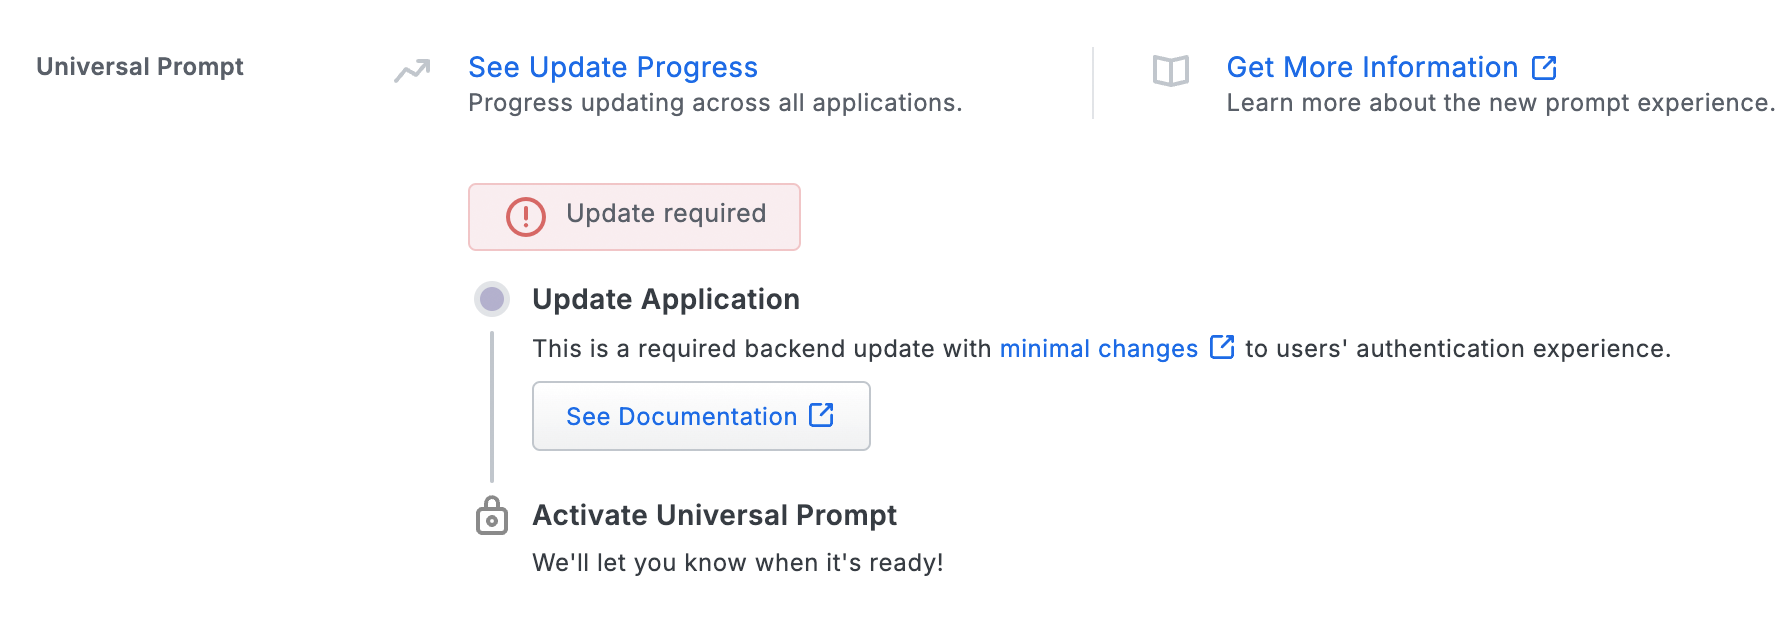 Universal Prompt Info - Update Required